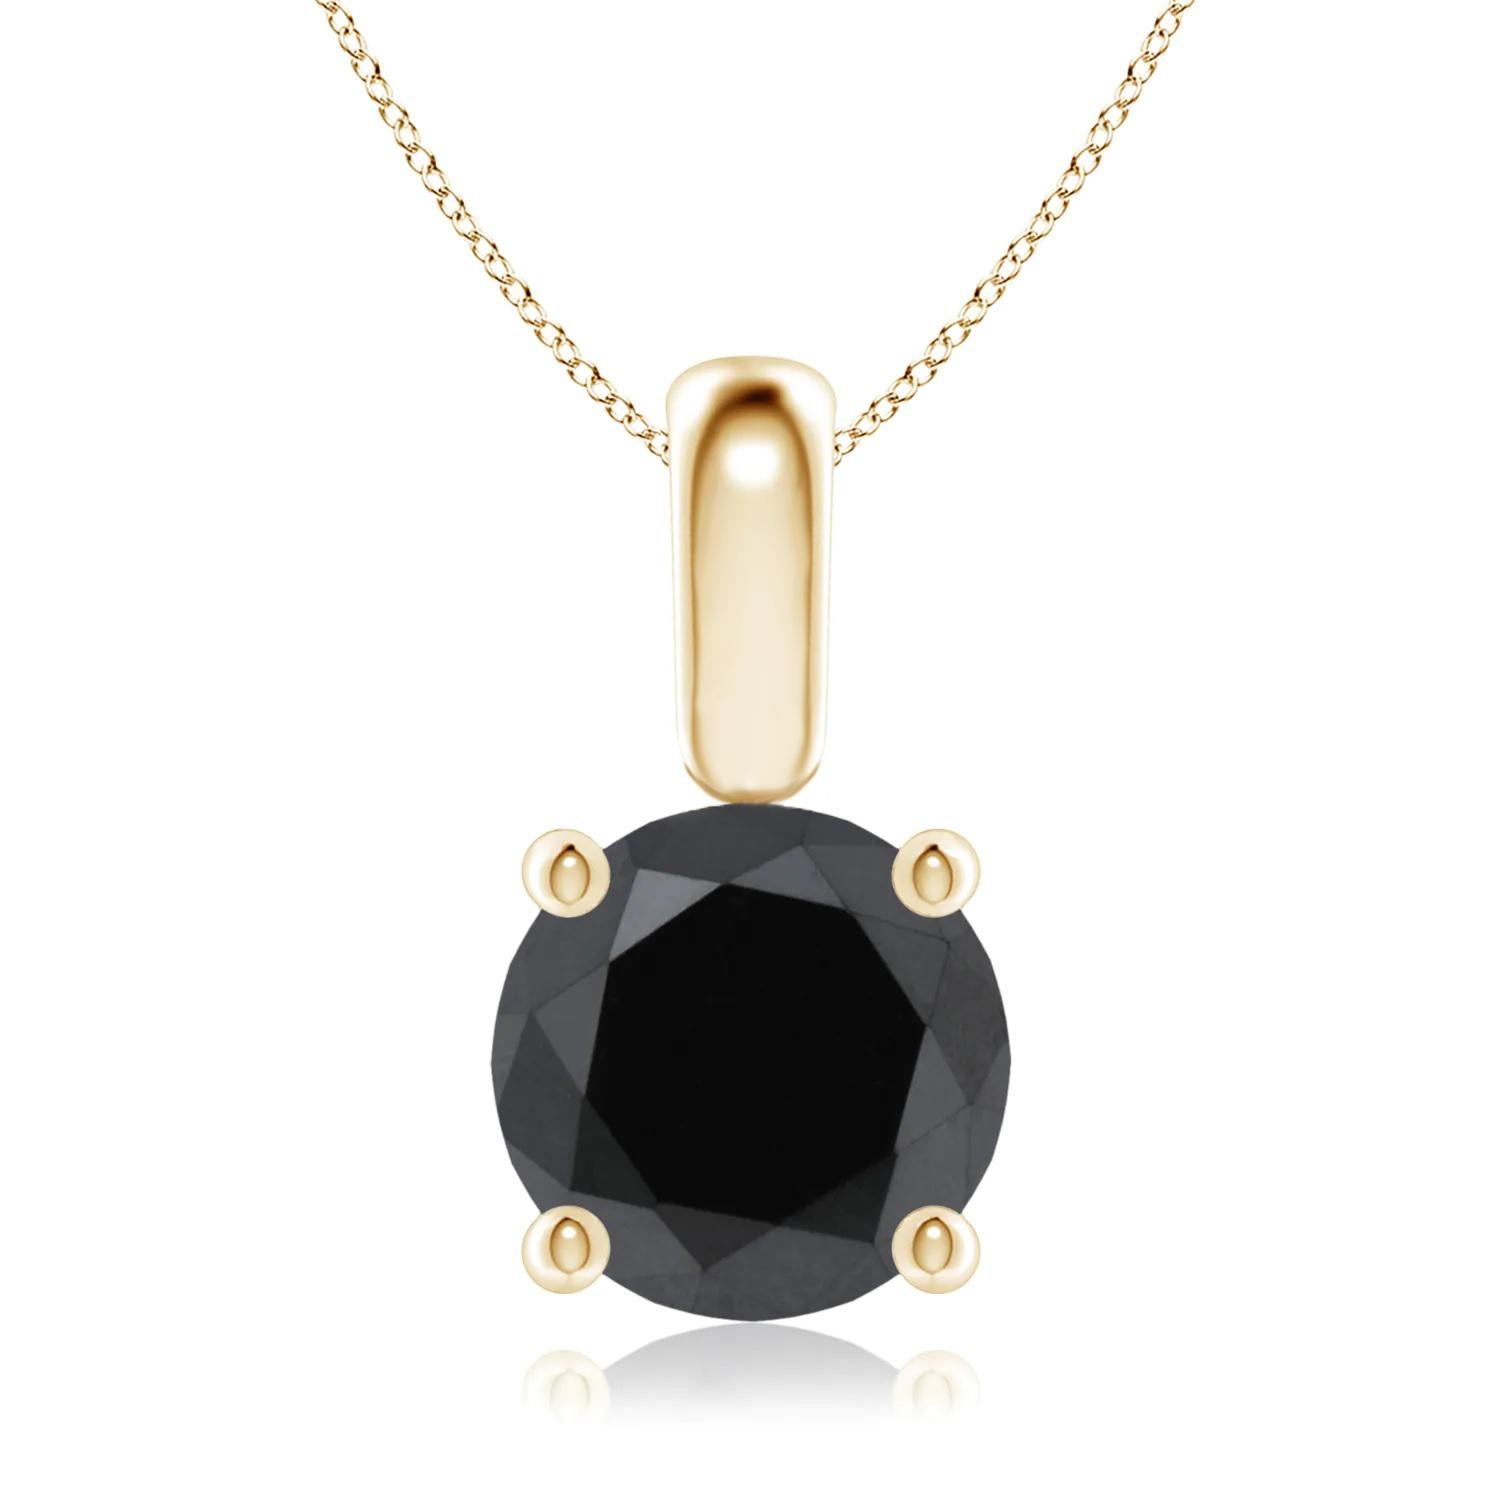 Contemporary 1.6 Carat Round Black Diamond Solitaire Pendant Necklace in 14K Yellow Gold